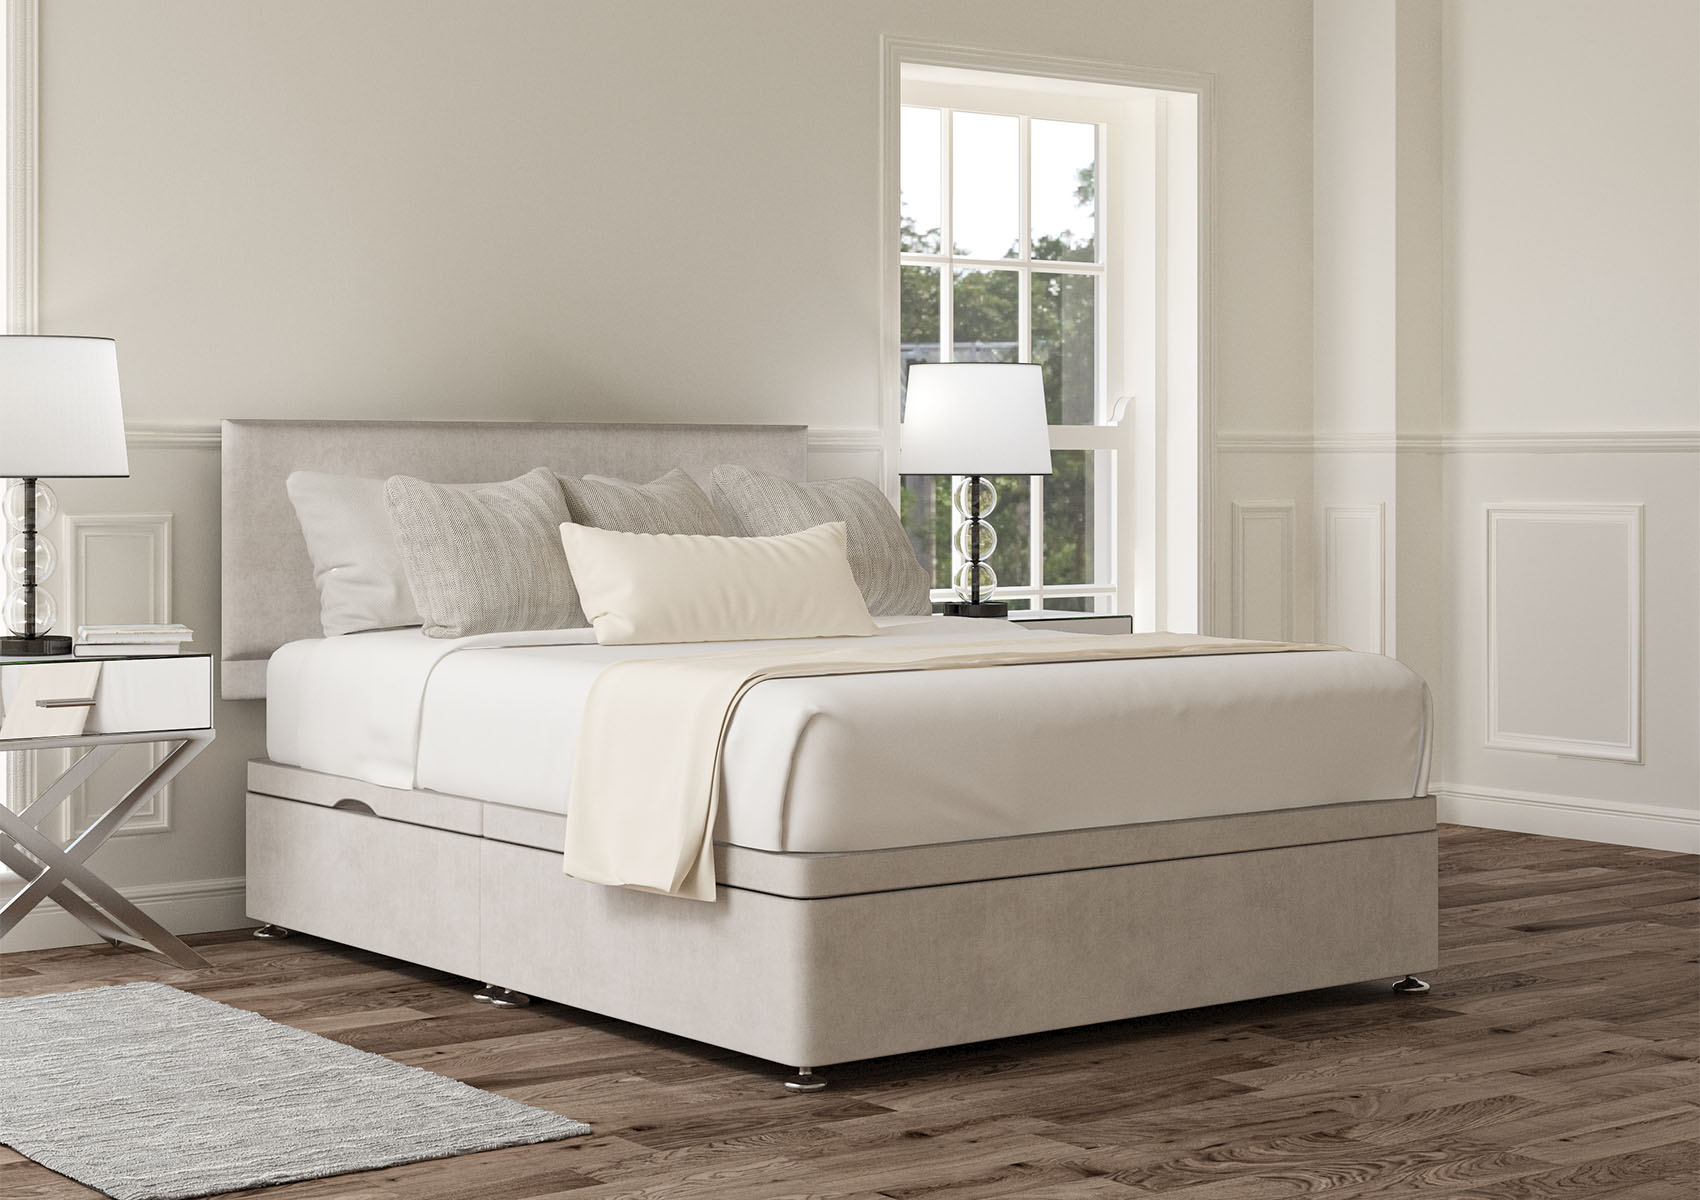 View Henley Naples Cream Upholstered King Size Ottoman Bed Time4Sleep information